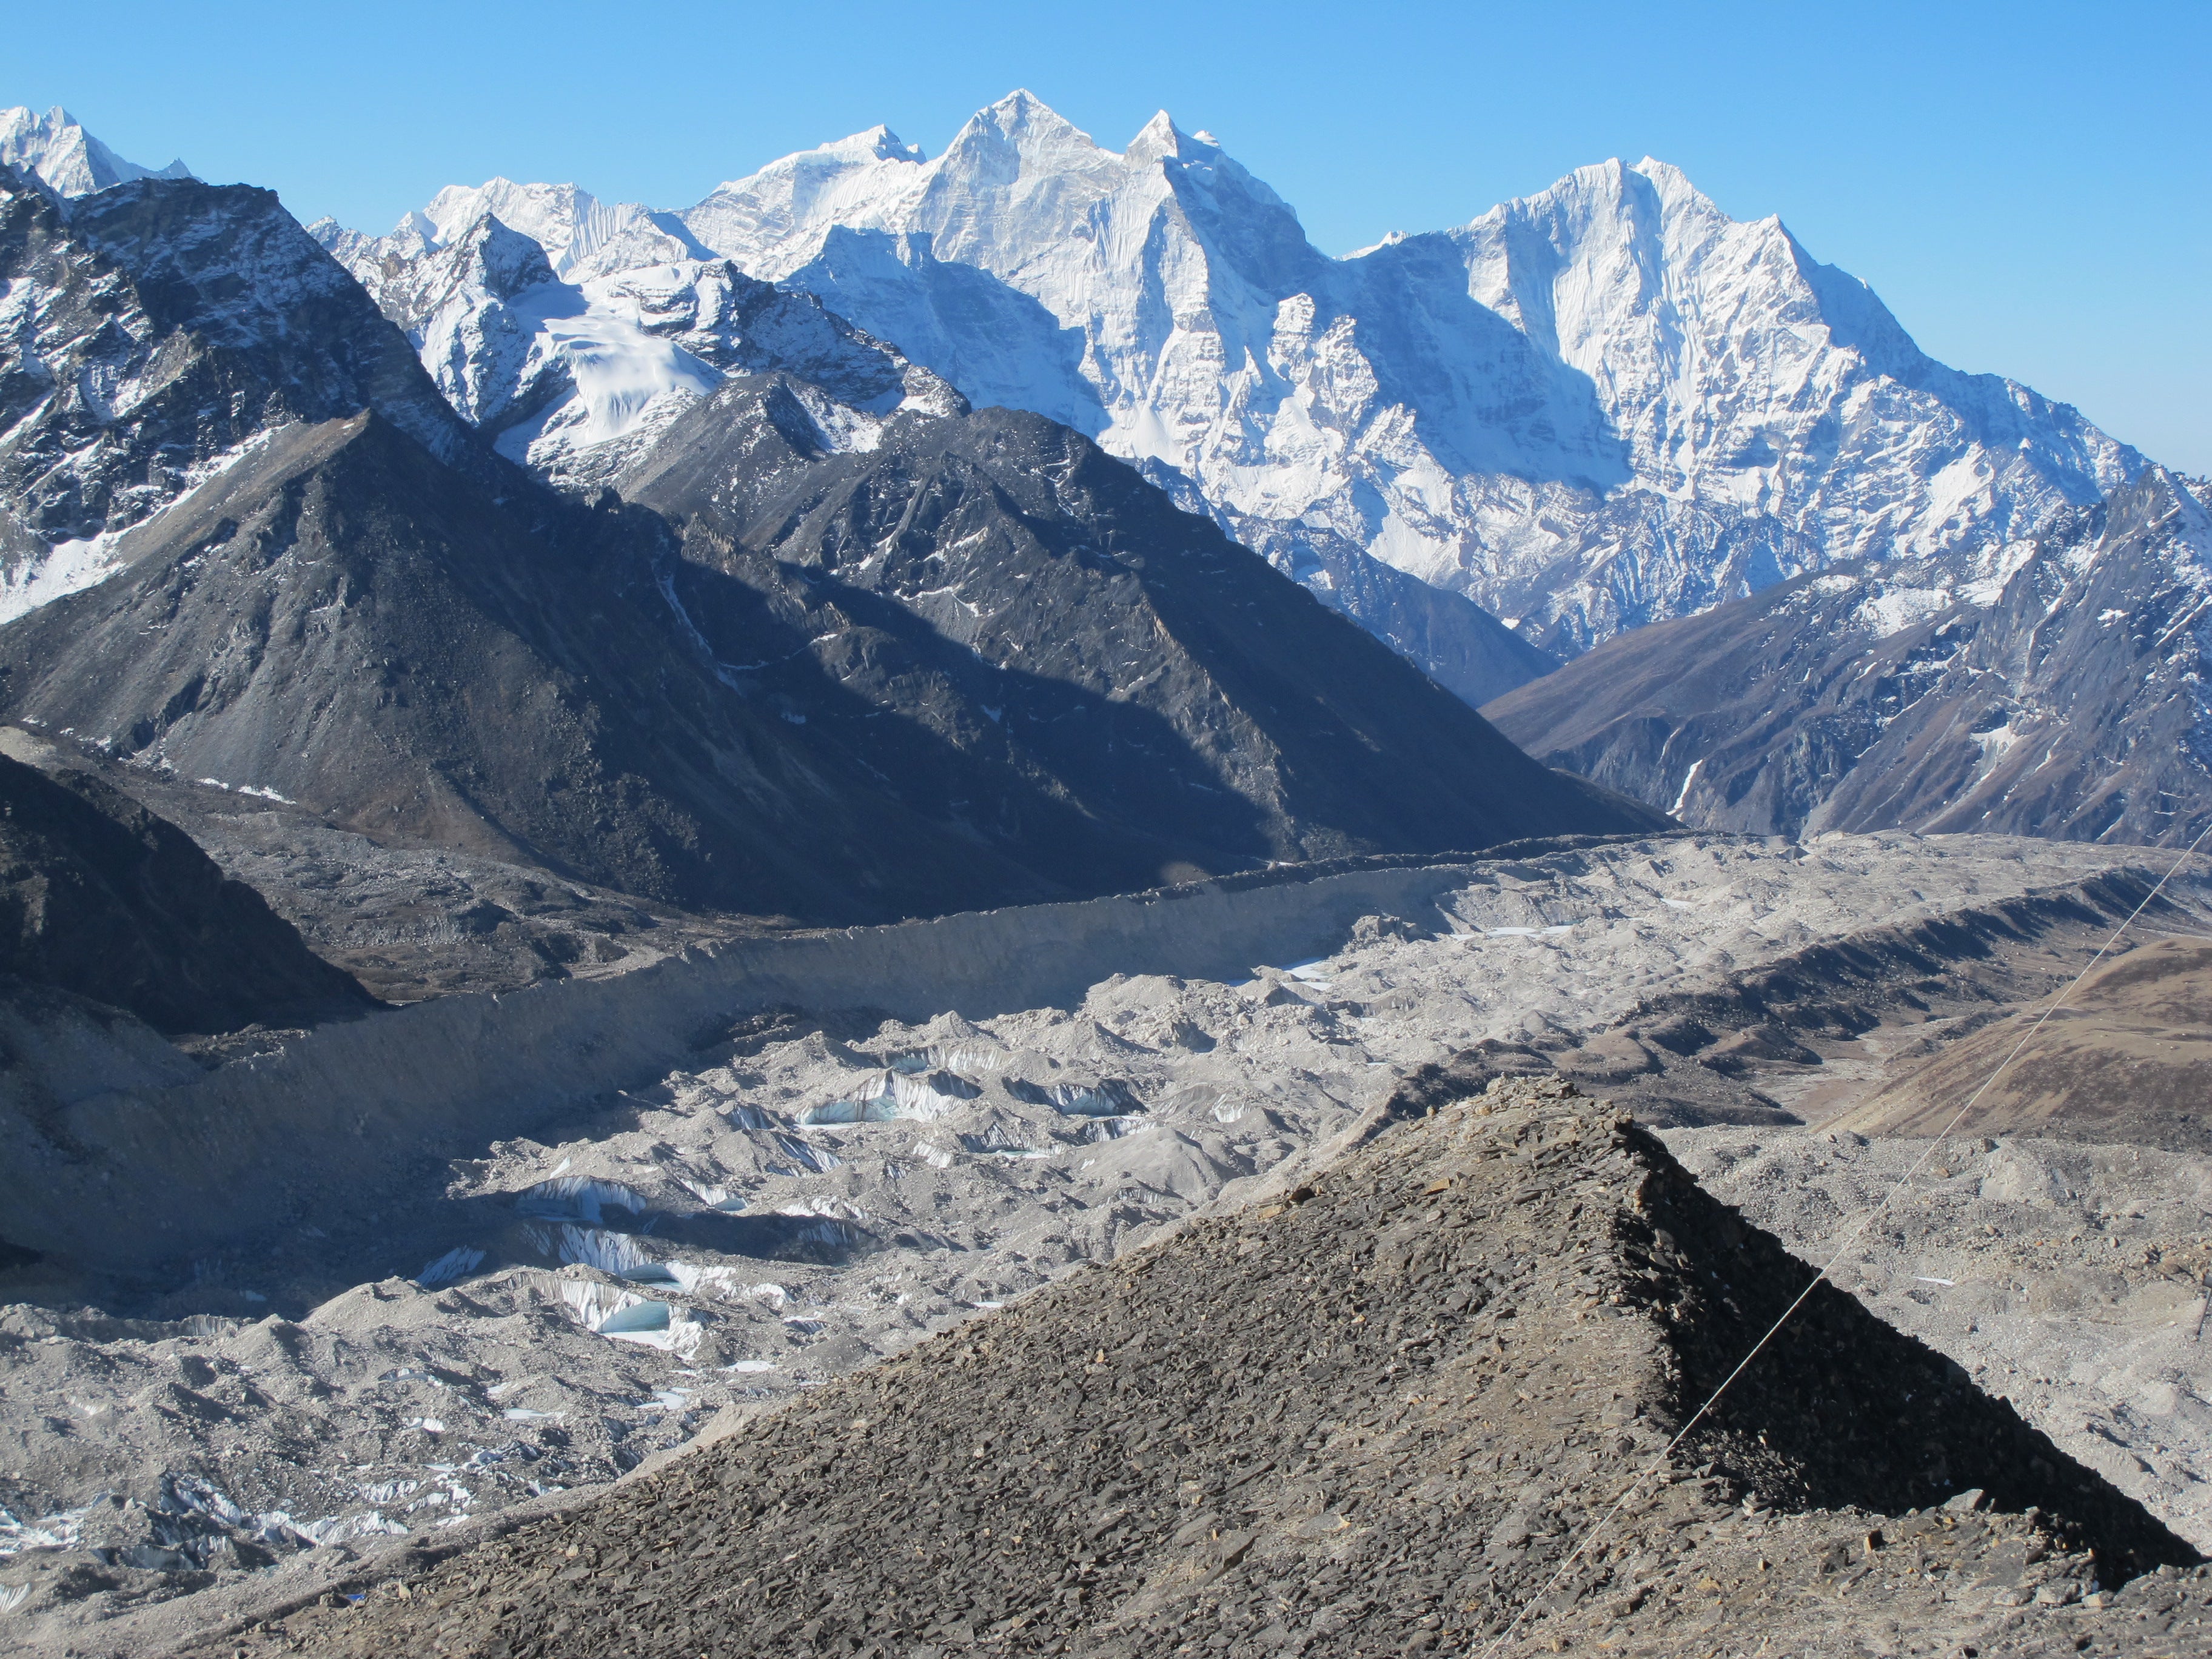 Khumbu Glacier in northern Nepal. Ice melt is now occurring in the Himalayas 10 times faster than in previous centuries